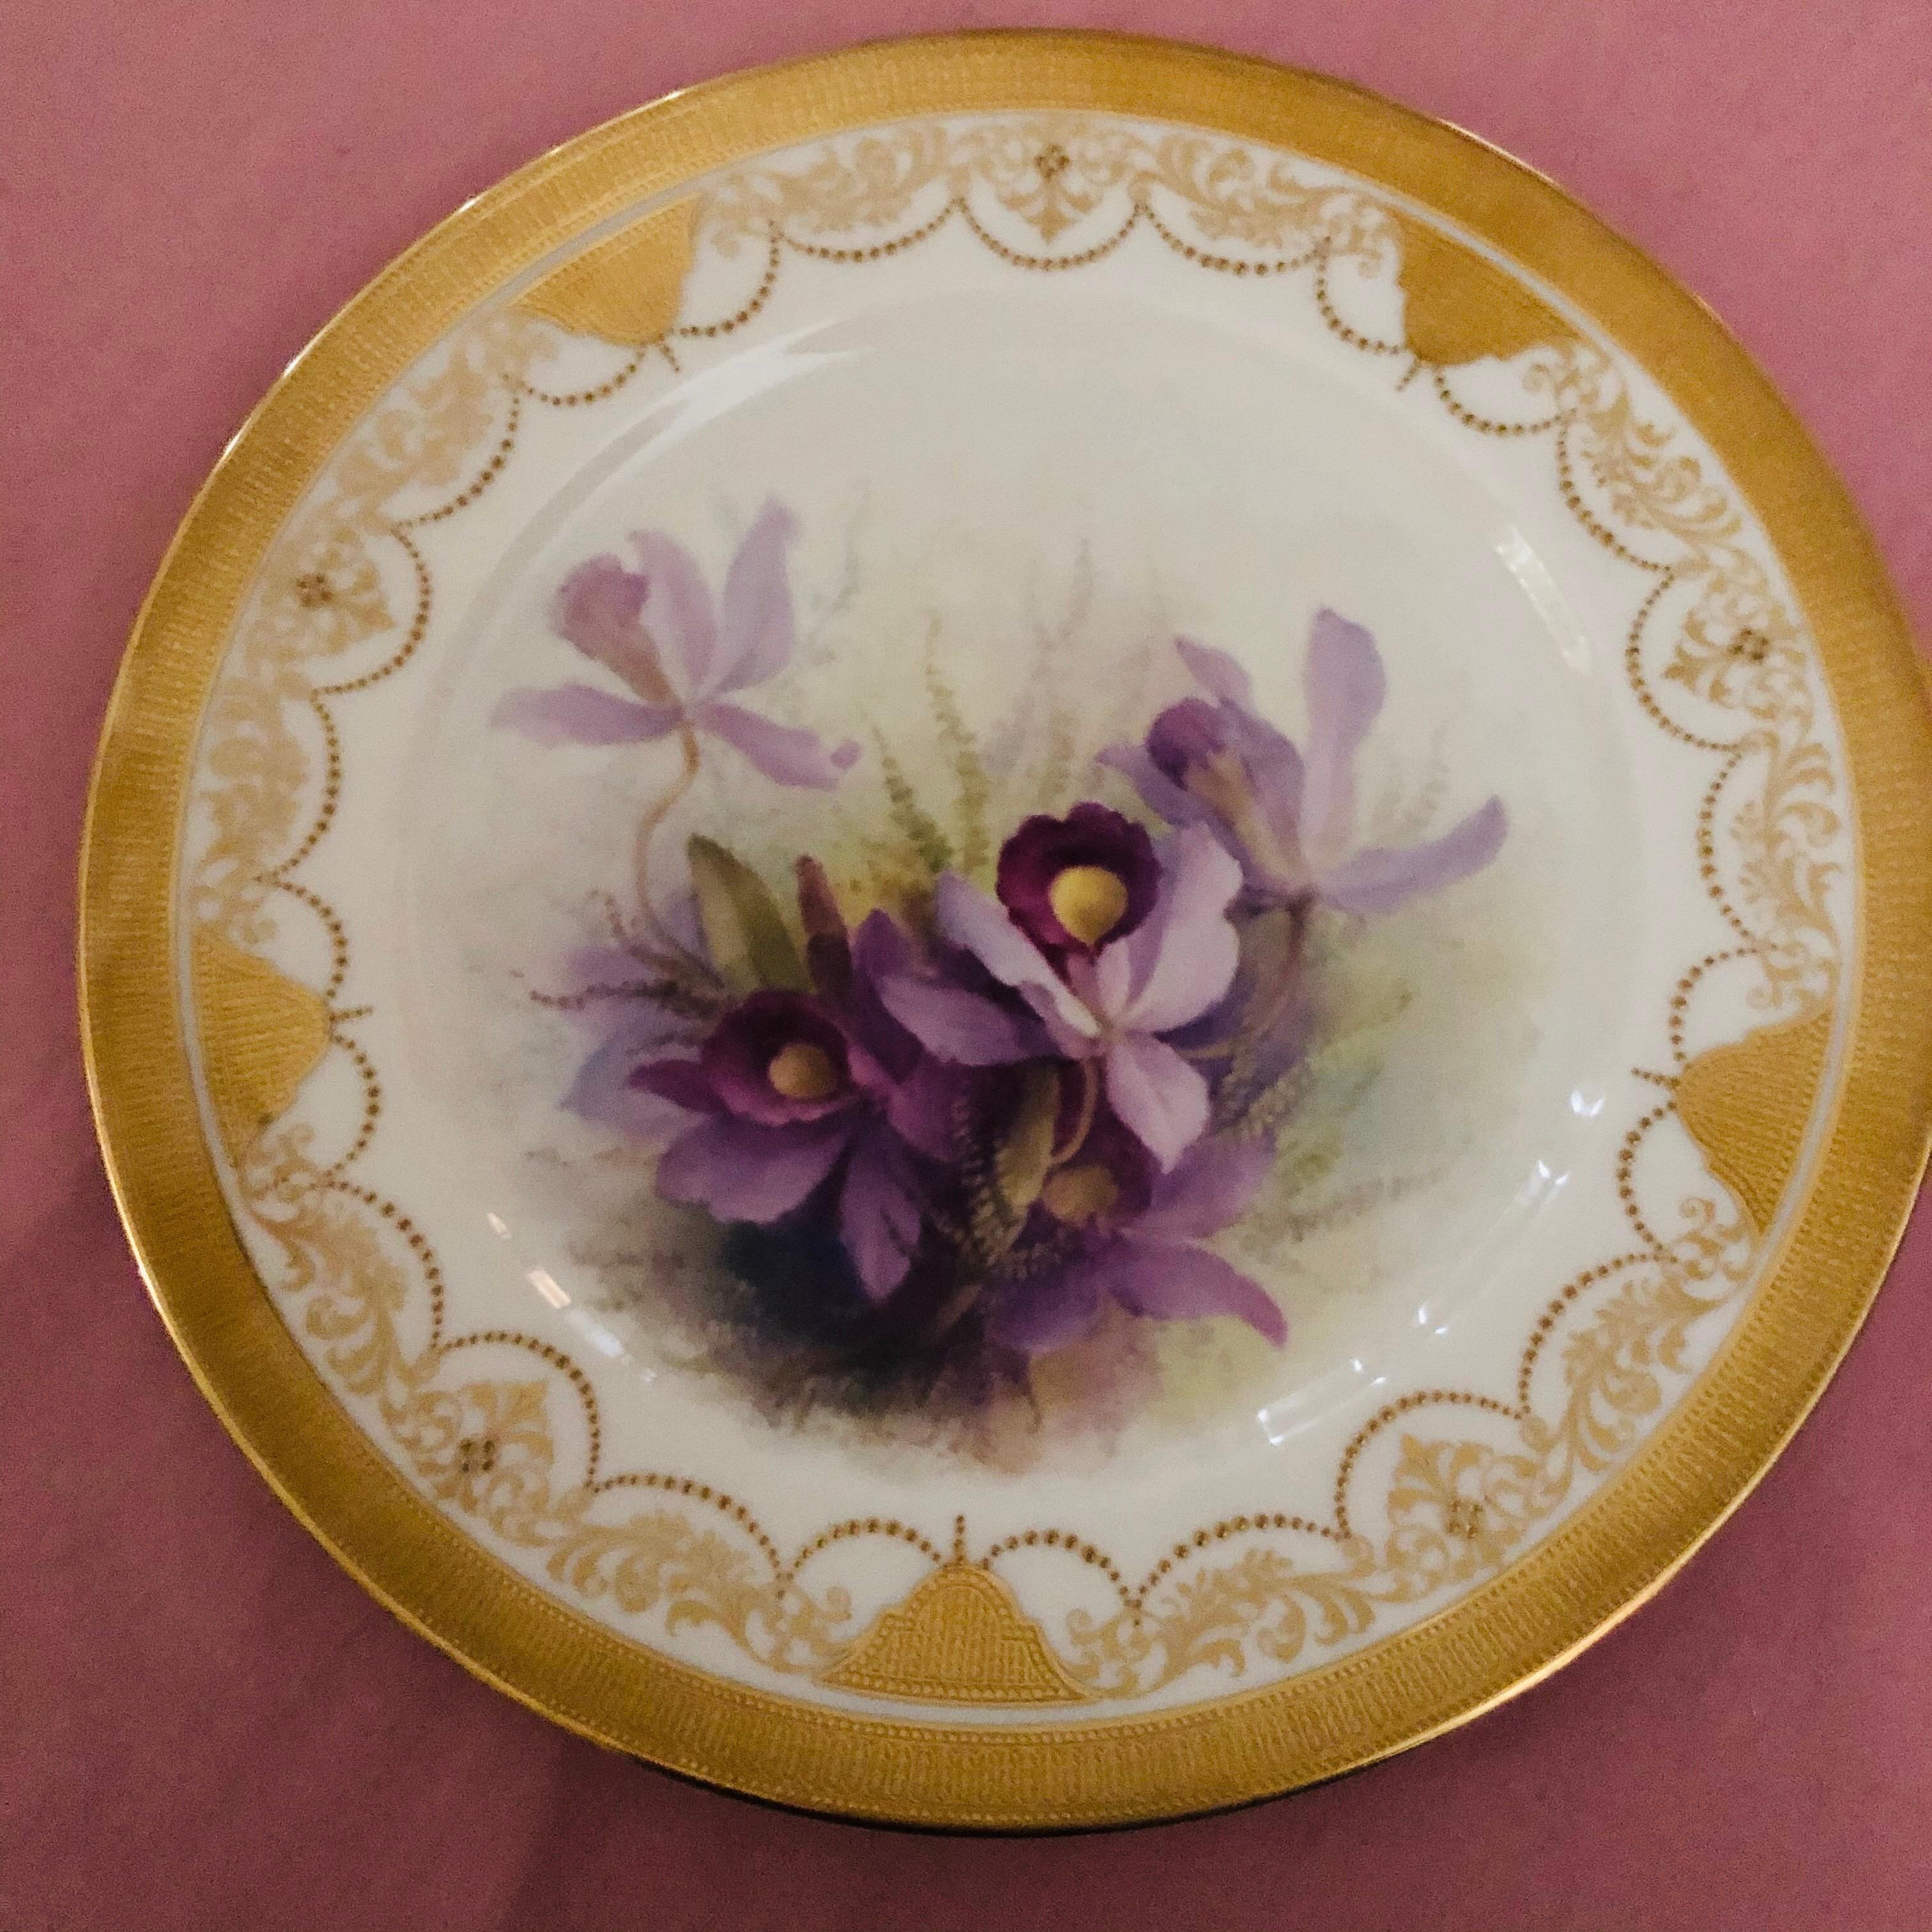 Set of Twelve Exceptional Lenox Orchid Dinner Plates Artist Signed W. H. Morley In Excellent Condition For Sale In Boston, MA